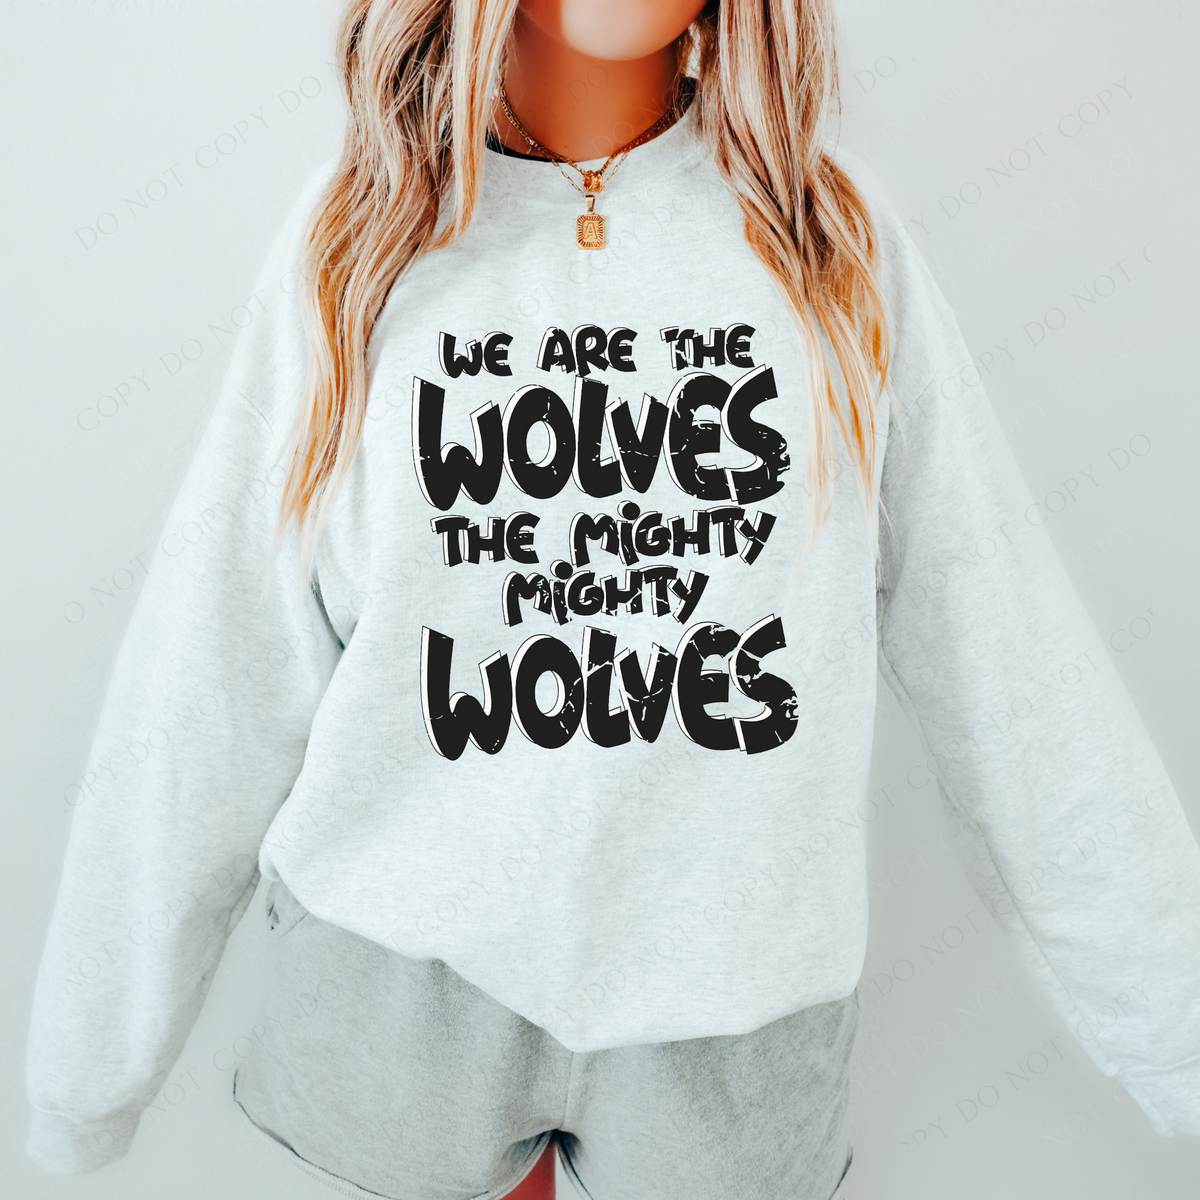 We are the Wolves the Mighty Mighty Wolves Distressed Shadow in Black and White Mascot Digital Design, PNG